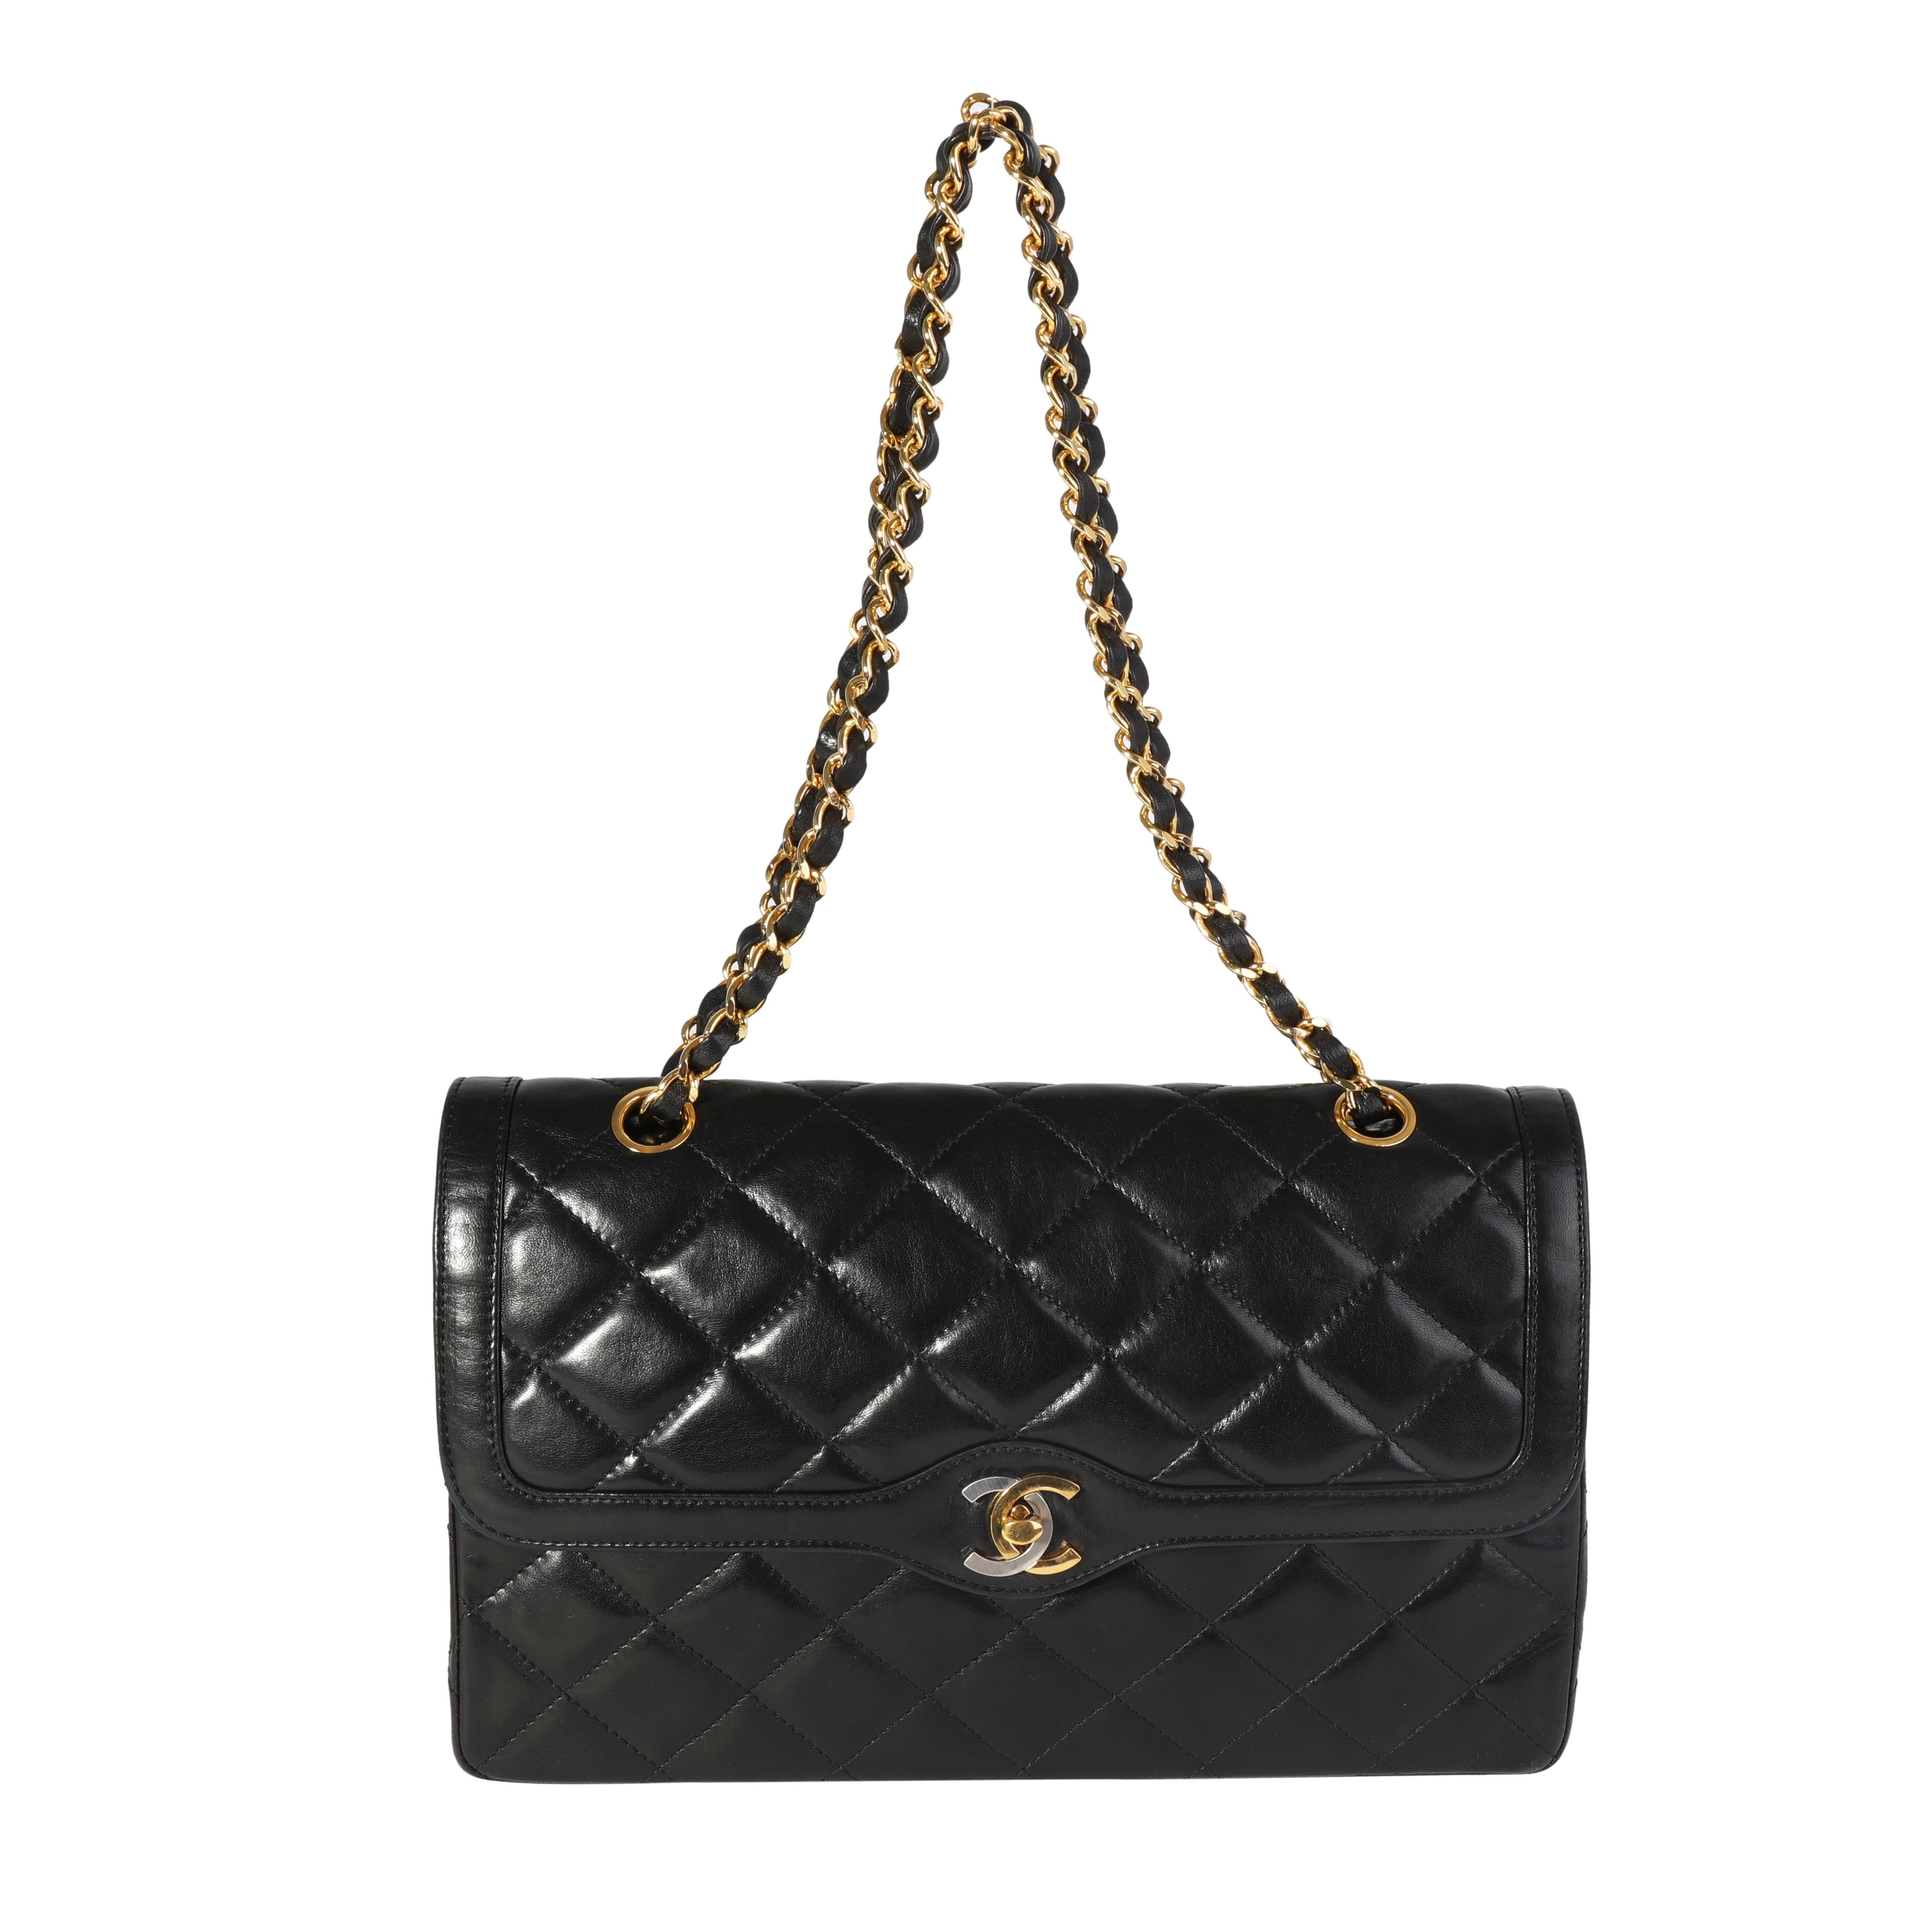 Listing Title: Chanel Vintage Black Quilted Lambskin Double Flap Bag
SKU: 117803
Condition: Pre-owned 
Handbag Condition: Very Good
Condition Comments: Very Good Condition. Light scuffing to corners. Scuffing and indentation to exterior leather.